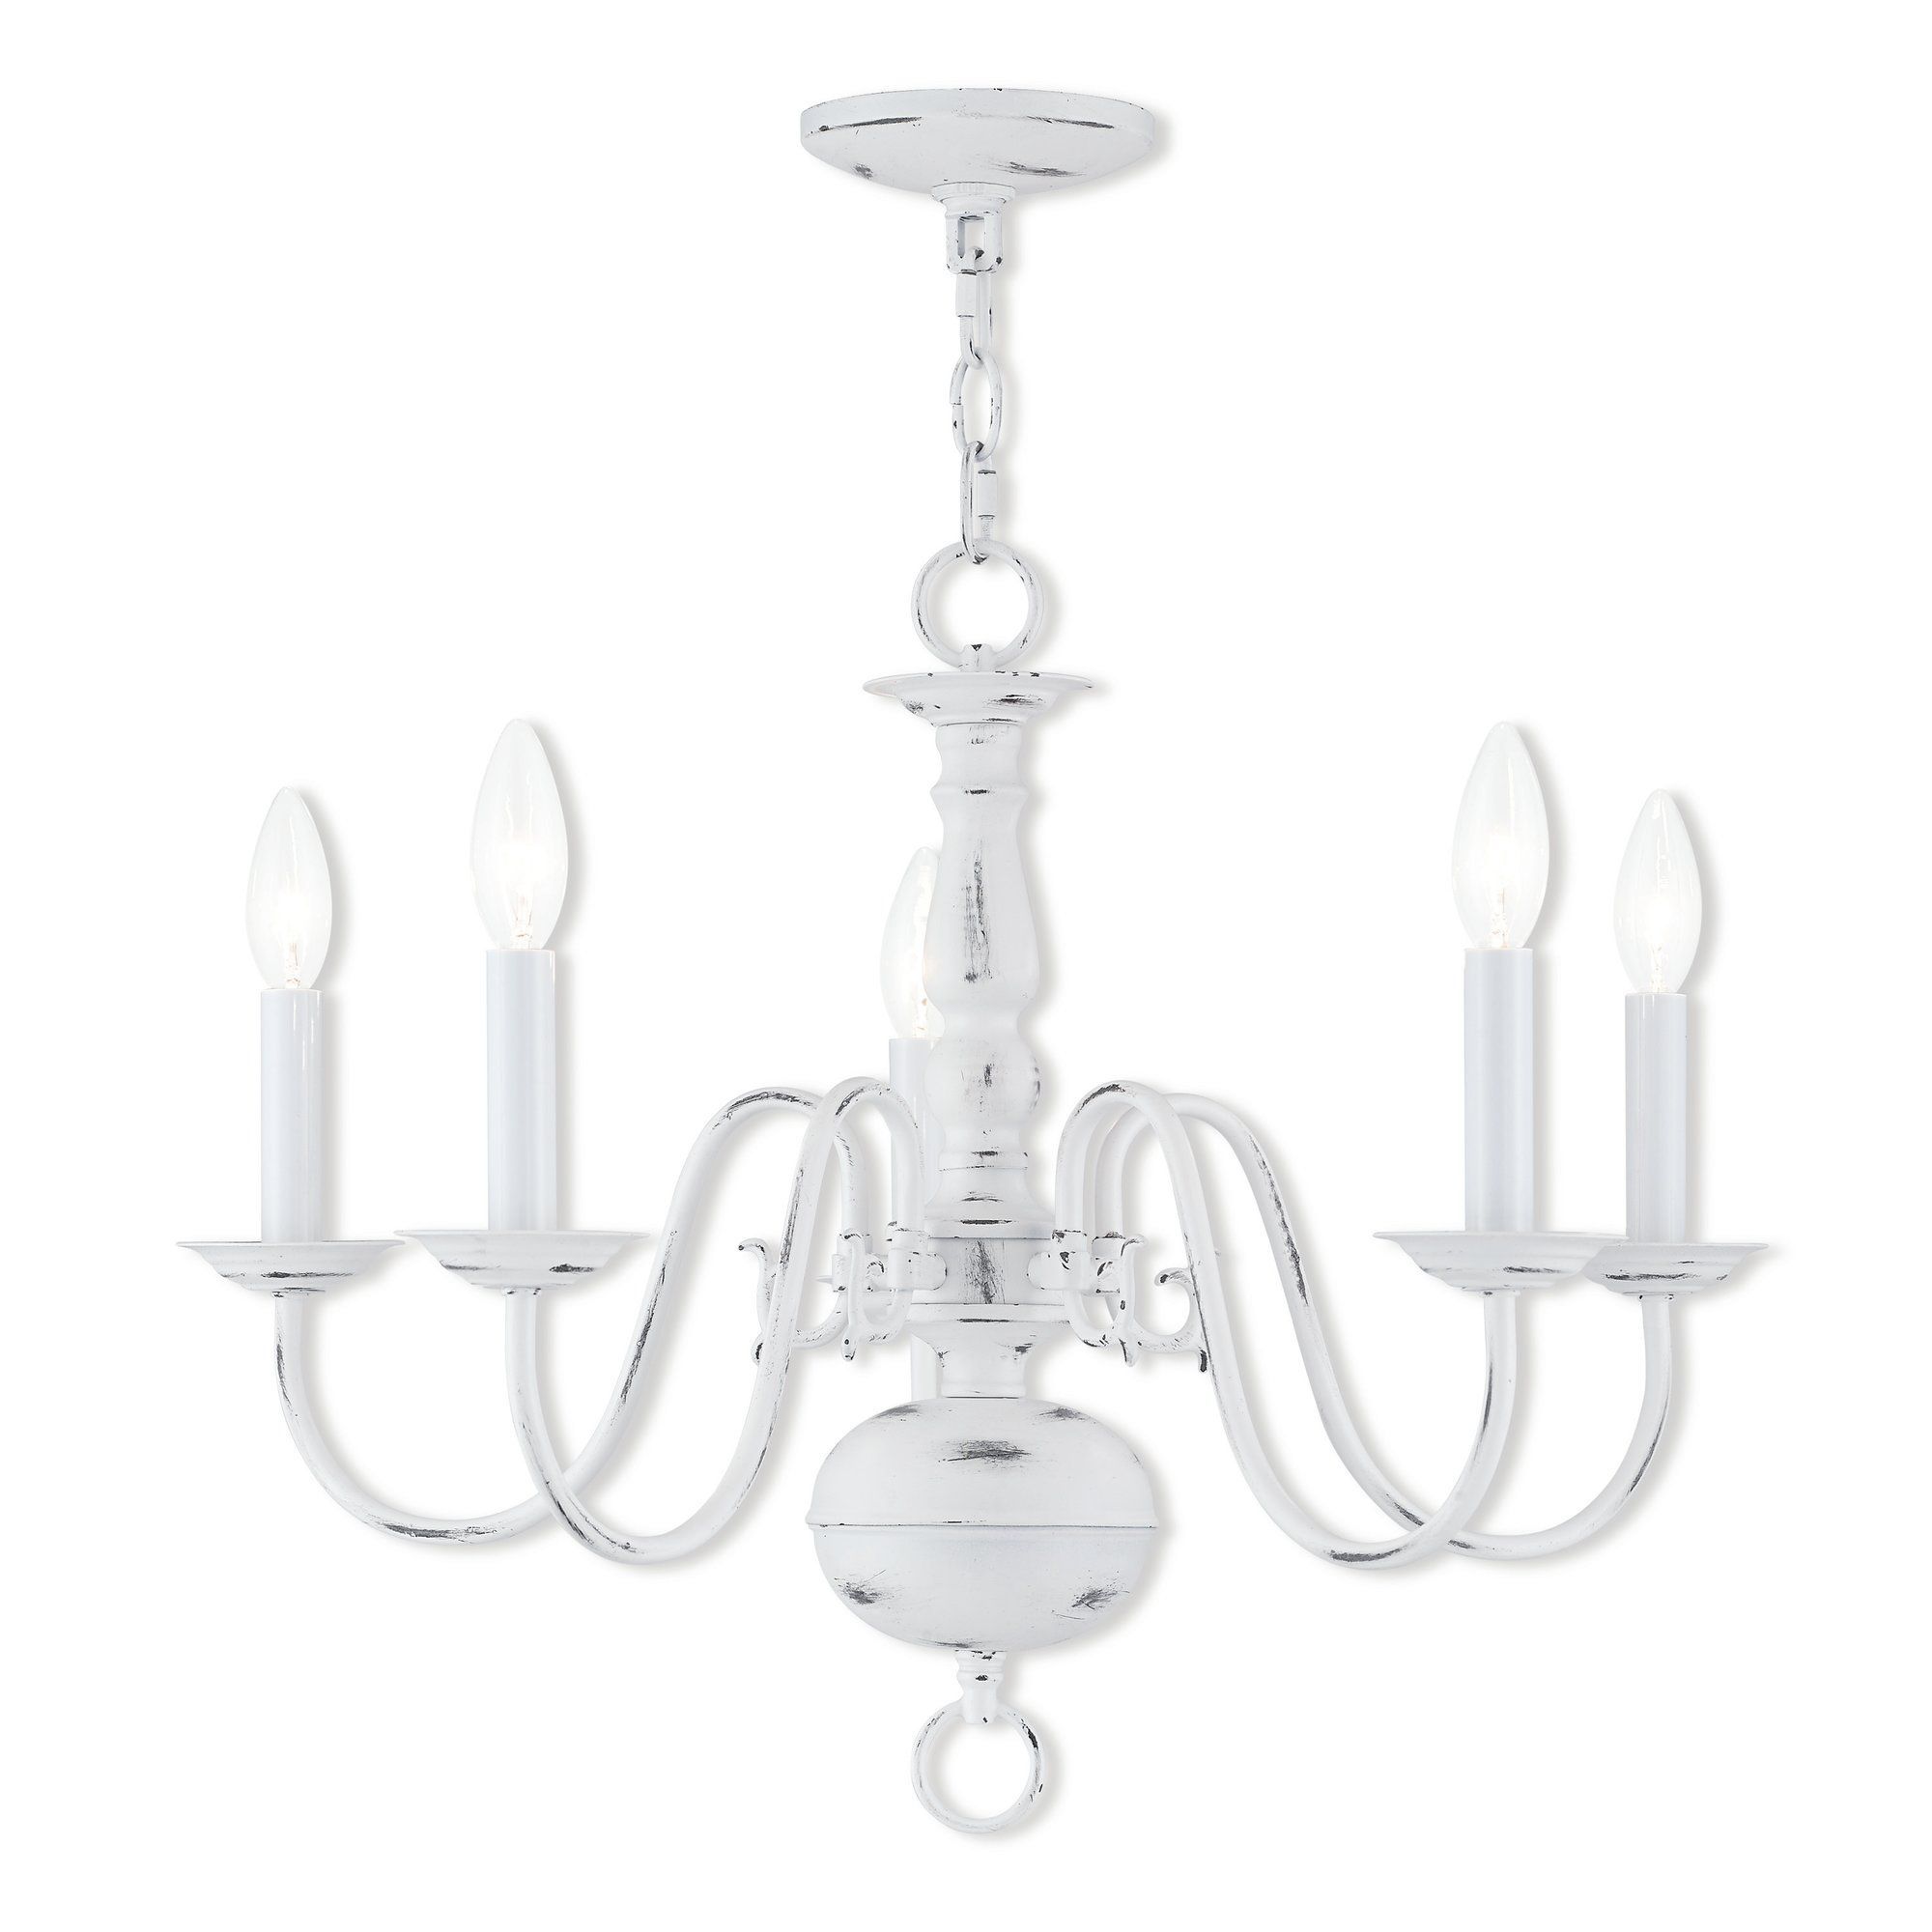 Allensby 5 Light Candle Style Chandelier | Products | Livex Regarding Corneau 5 Light Chandeliers (View 20 of 30)